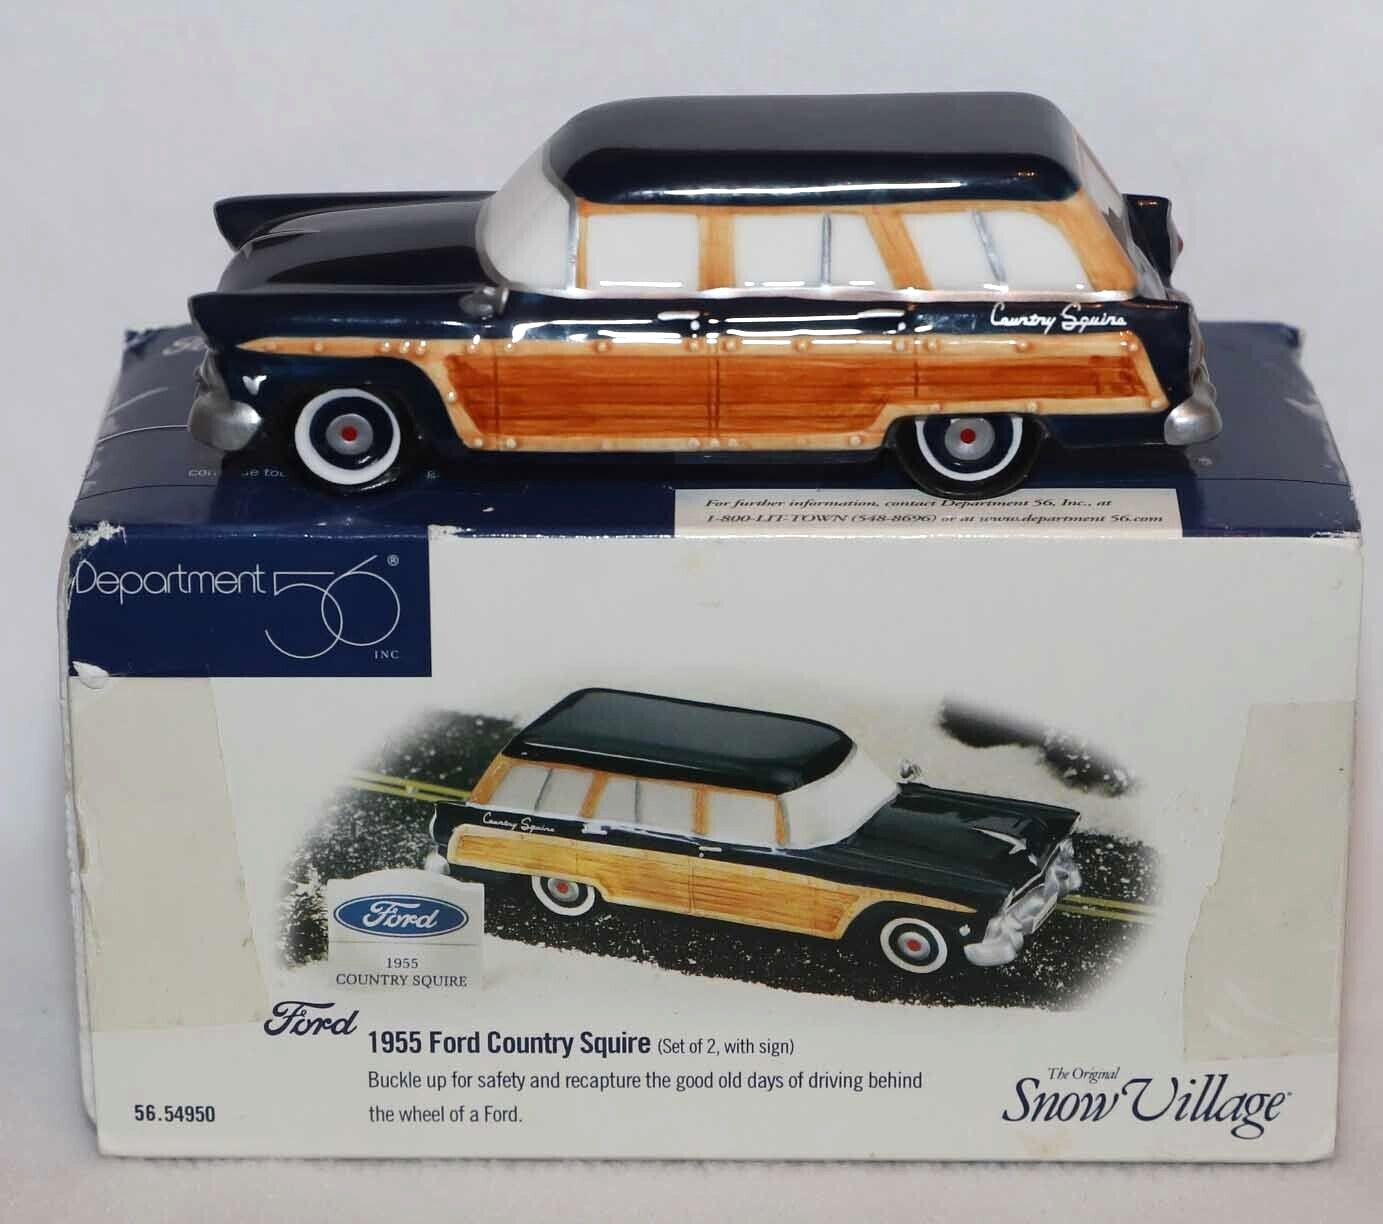 DEPT 56 1955 FORD COUNTRY SQUIRE 54950 SNOW VILLAGE CHRISTMAS